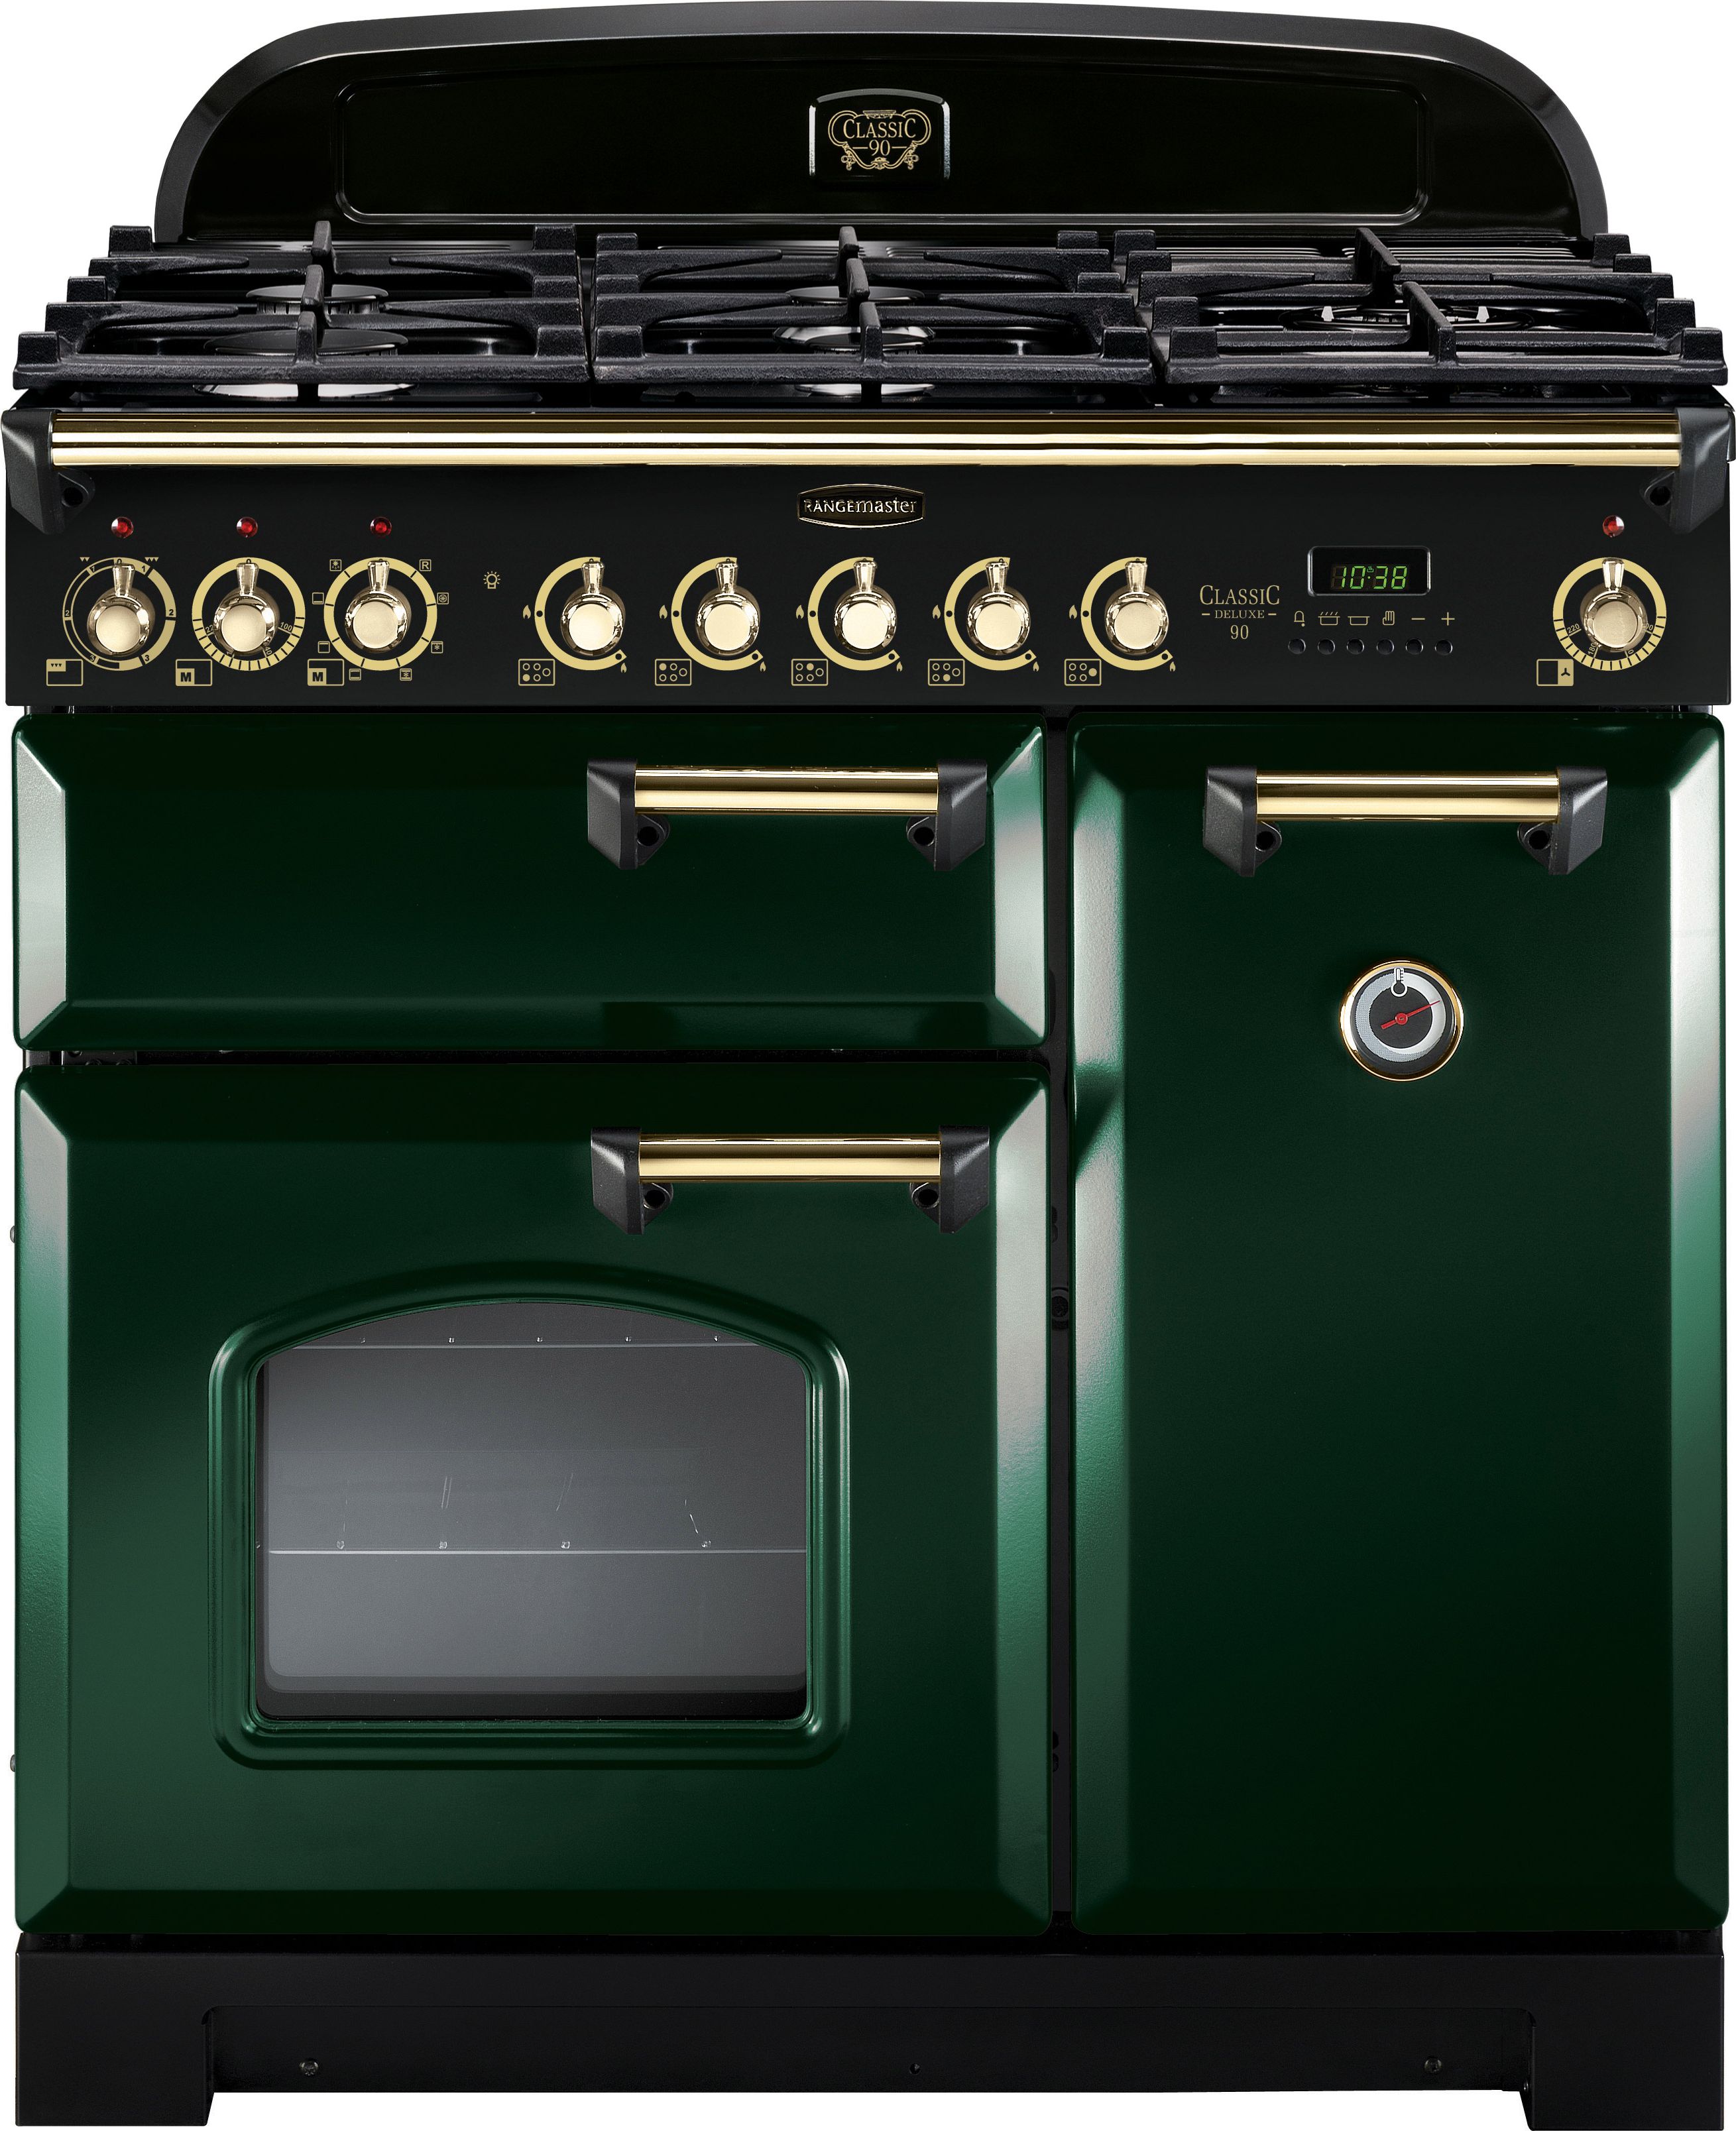 Rangemaster Classic Deluxe CDL90DFFRG/B 90cm Dual Fuel Range Cooker - Racing Green / Brass - A/A Rated, Green